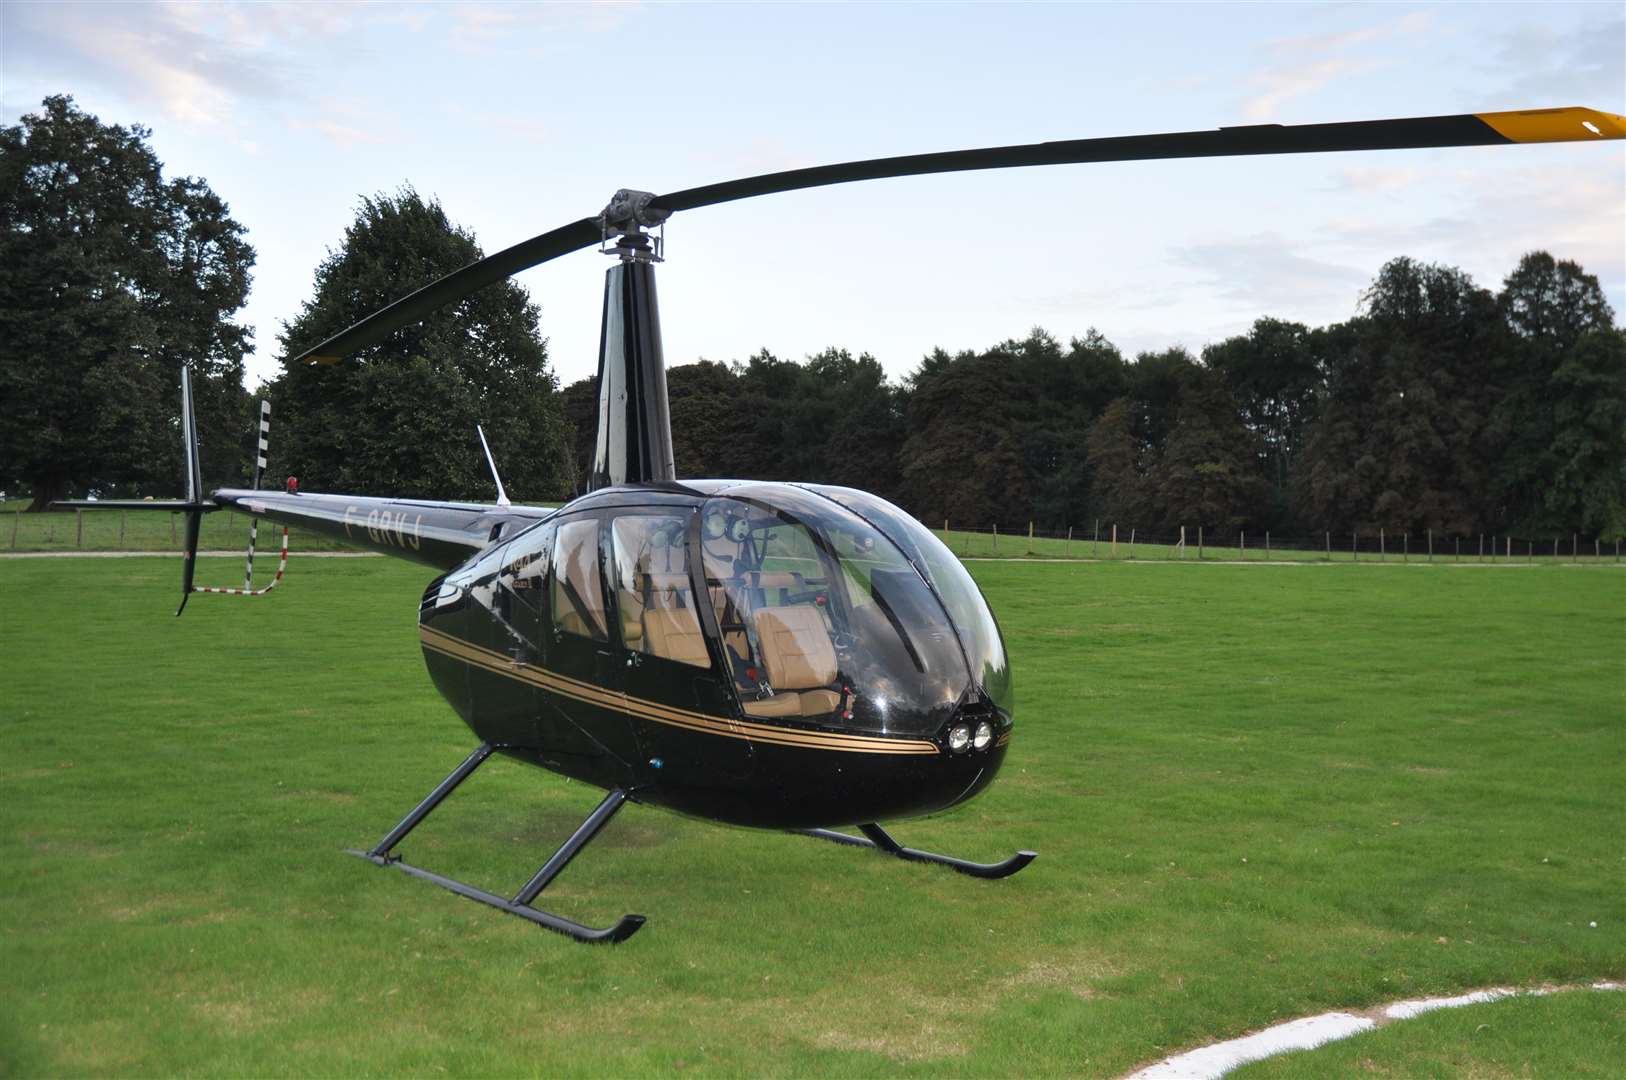 The helicopter used by Frederic Fagnoul